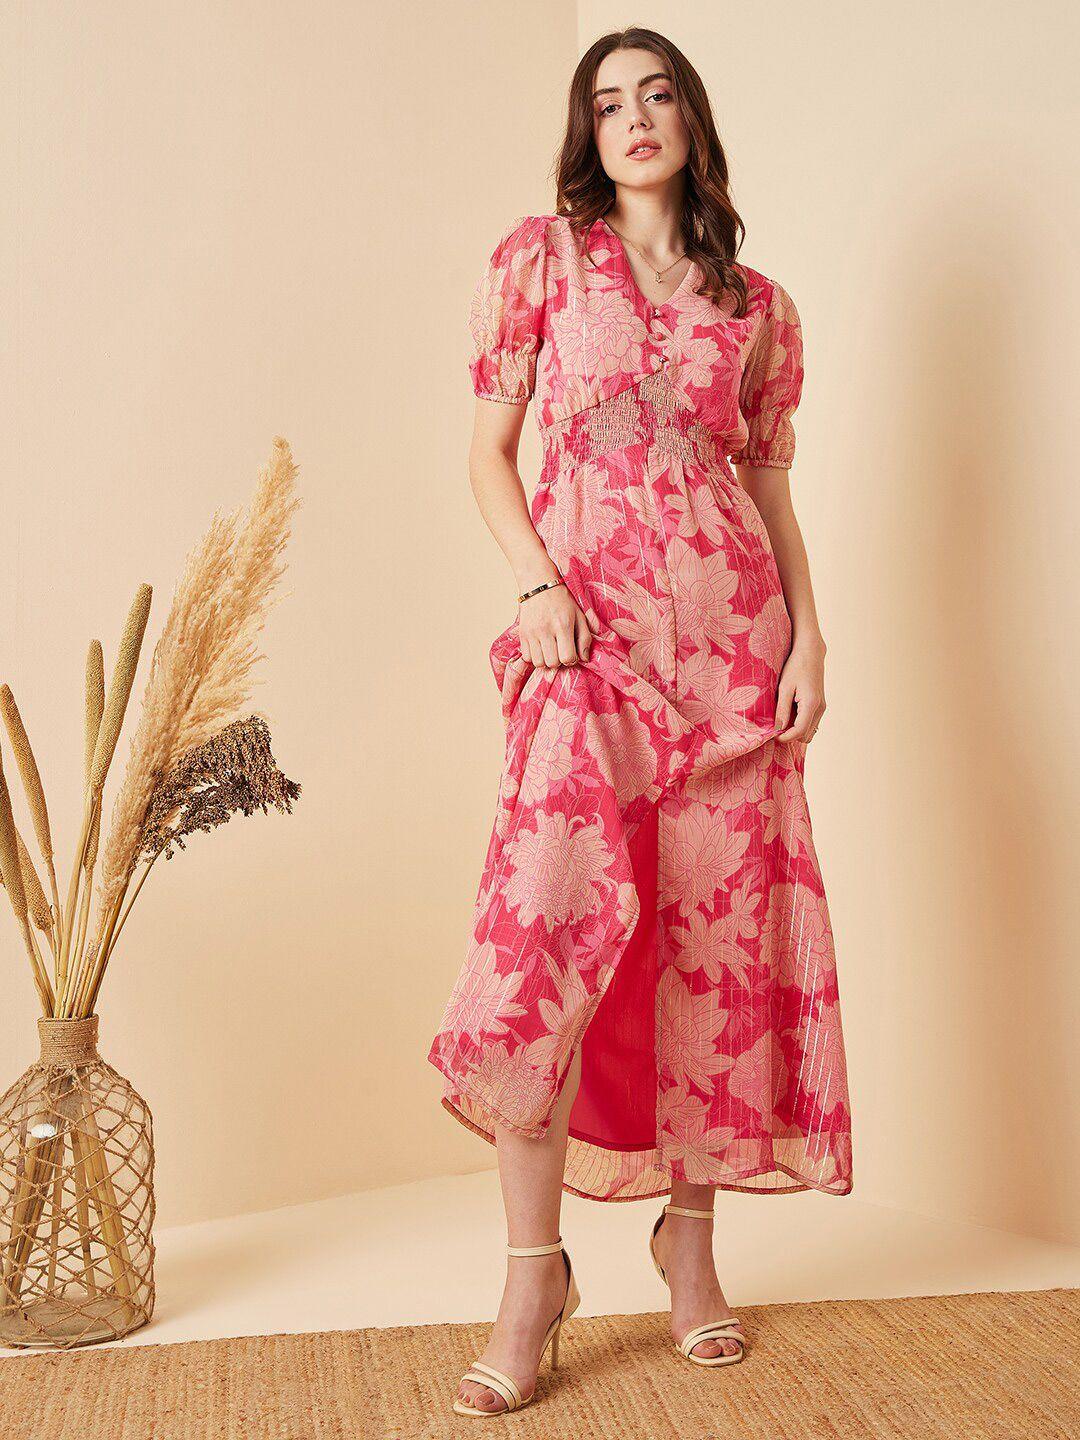 marie-claire-pink-&-peach-color-floral-printed-smocked-georgette-a-line-midi-dress